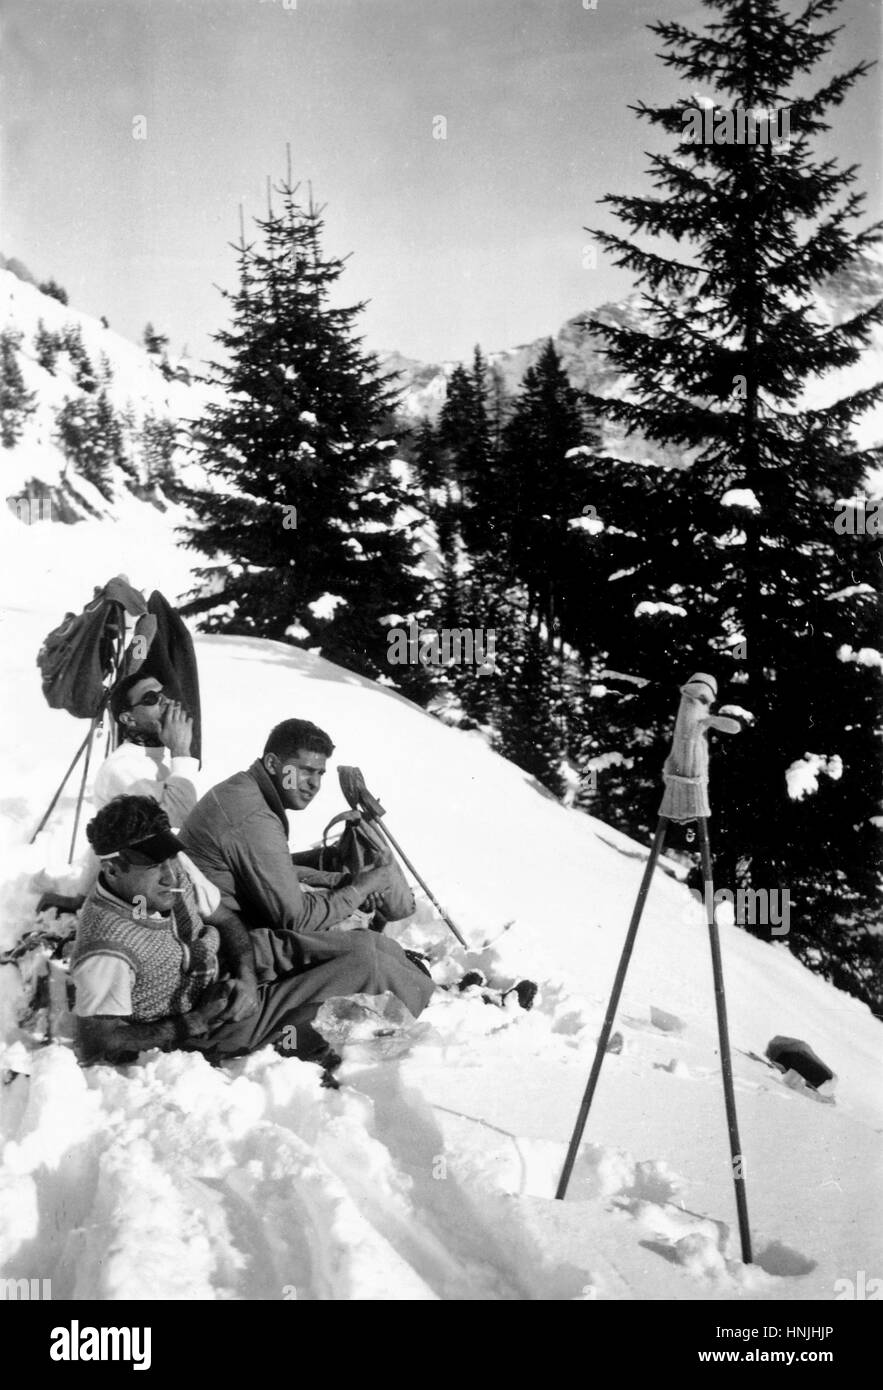 Giau Pass, Italy 1939 - young skiers rest sitting in the snow and smoking a cigarette en route to Giau Pass on Italian Dolomites in winter 1939. Scan from analog photography, private family collection before WWII. Stock Photo